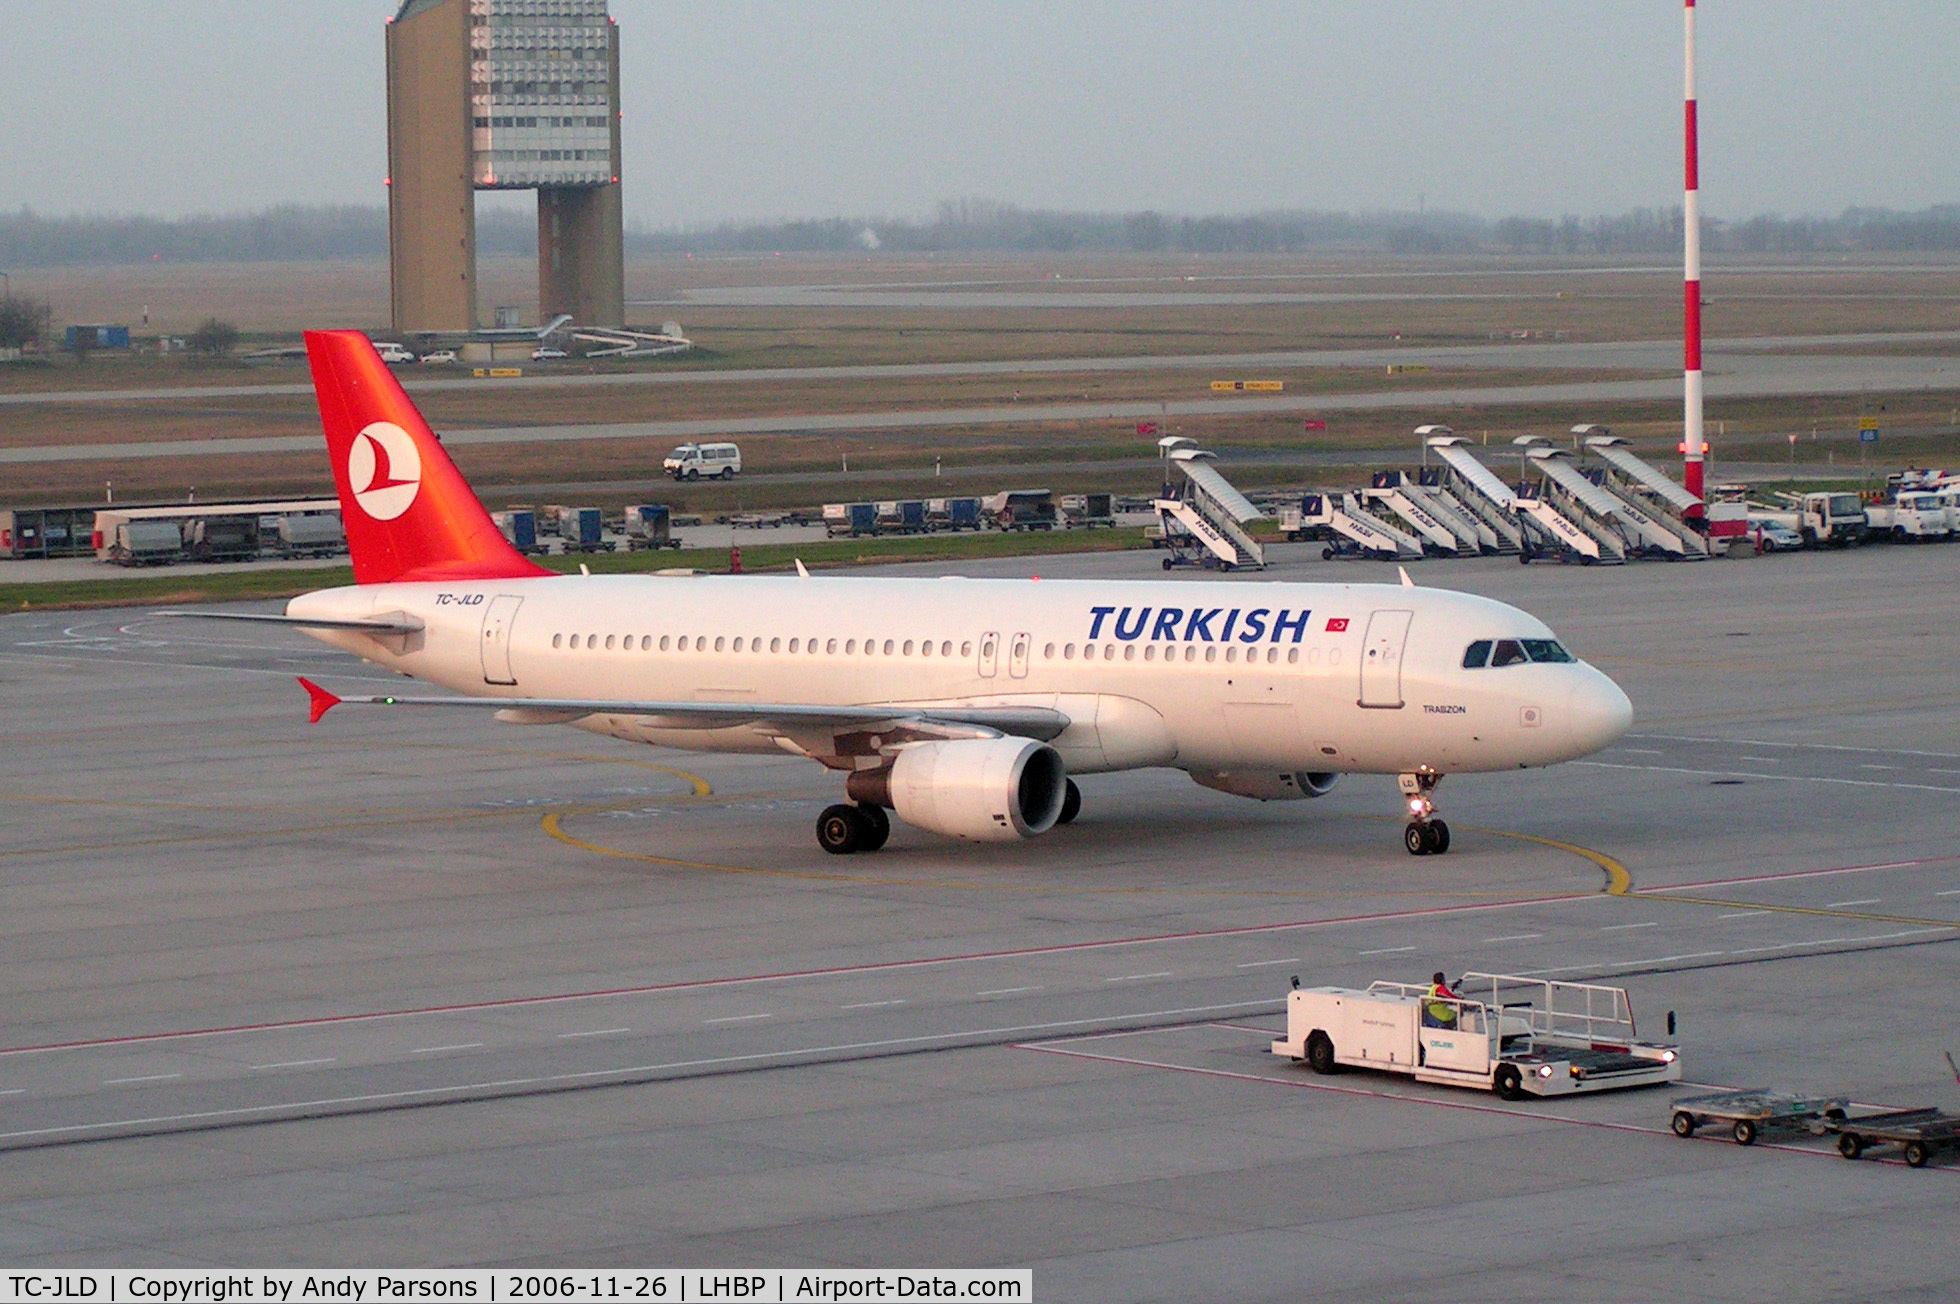 TC-JLD, 1996 Airbus A320-214 C/N 574, arriving at Budapest